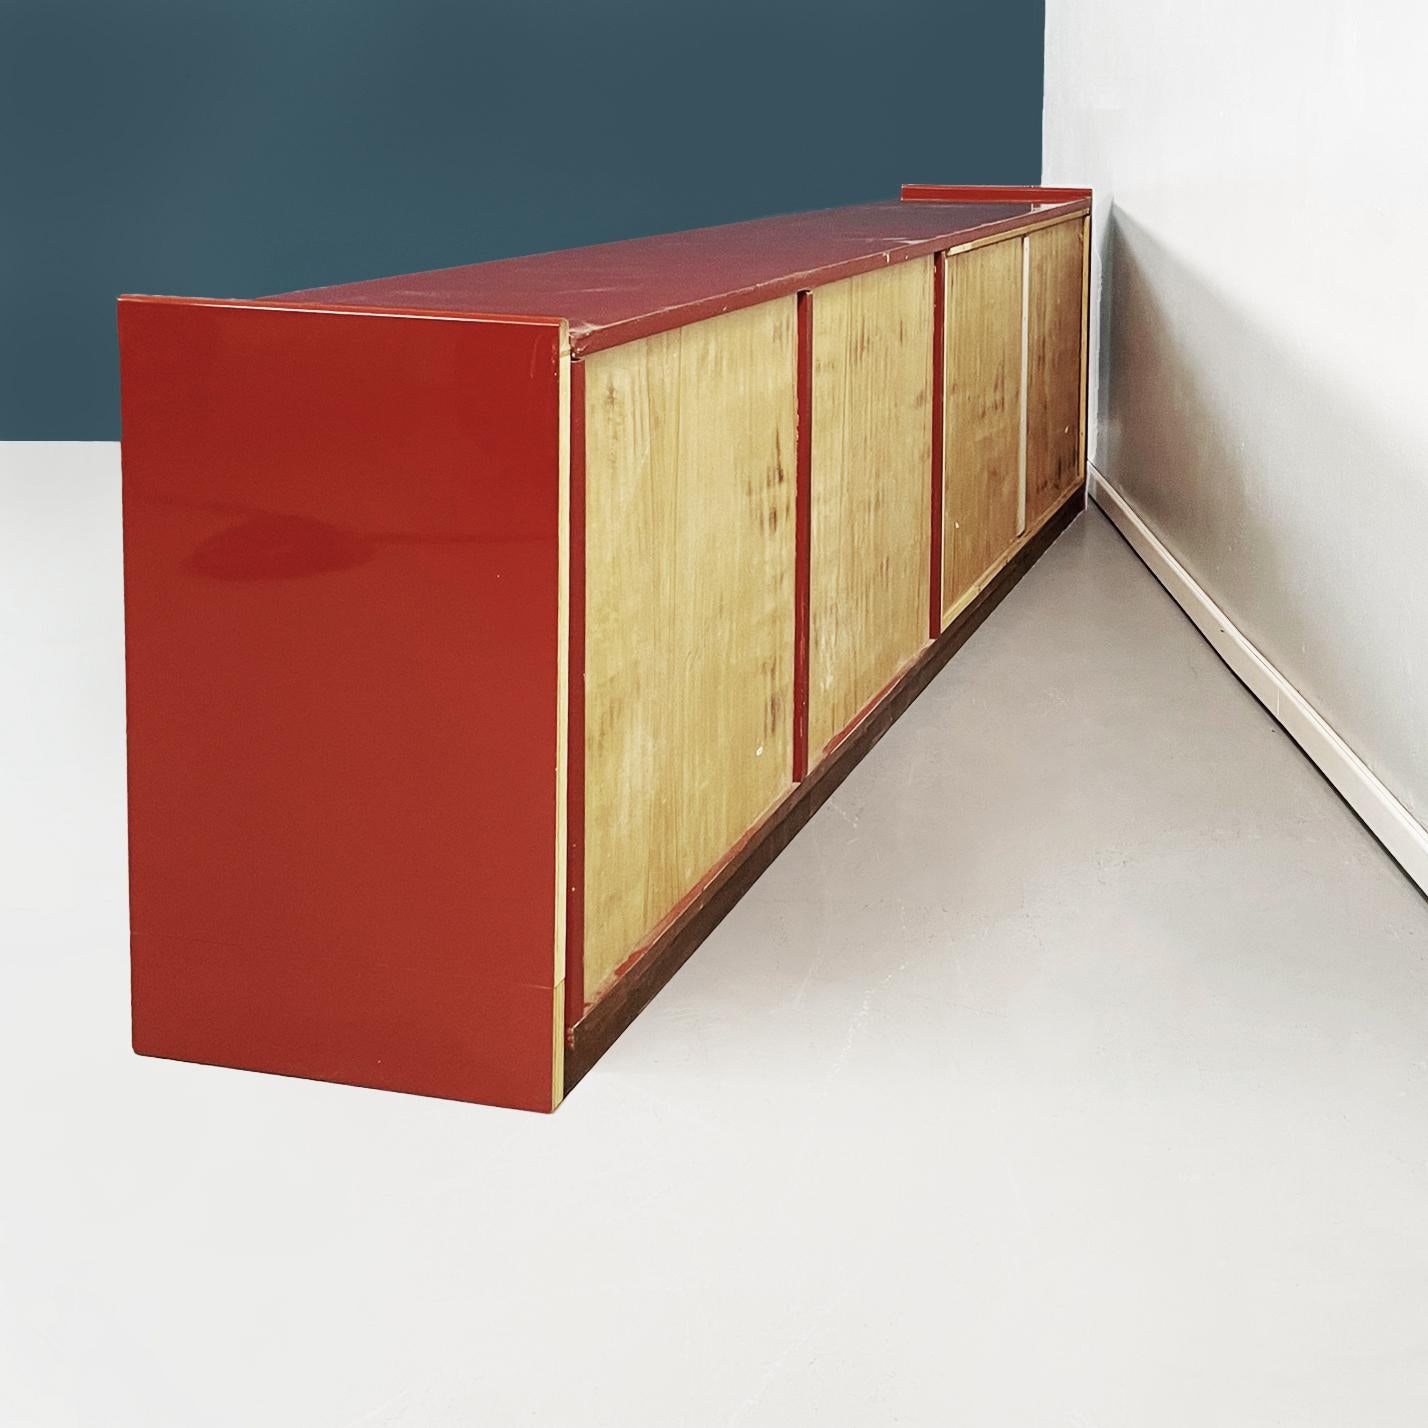 Italian Mid-Century Modern Rectangular Red Lacquered Solid Wood Sideboard, 1980s For Sale 1